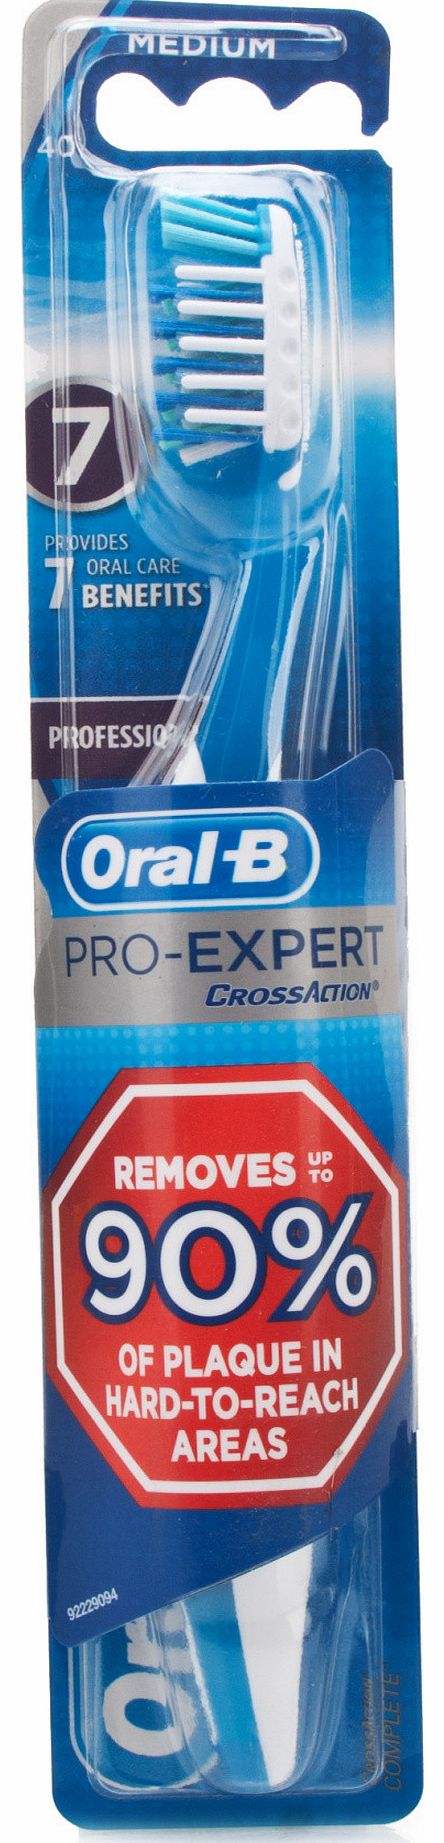 Oral B Oral-B Pro-Expert CrossAction Professional 40